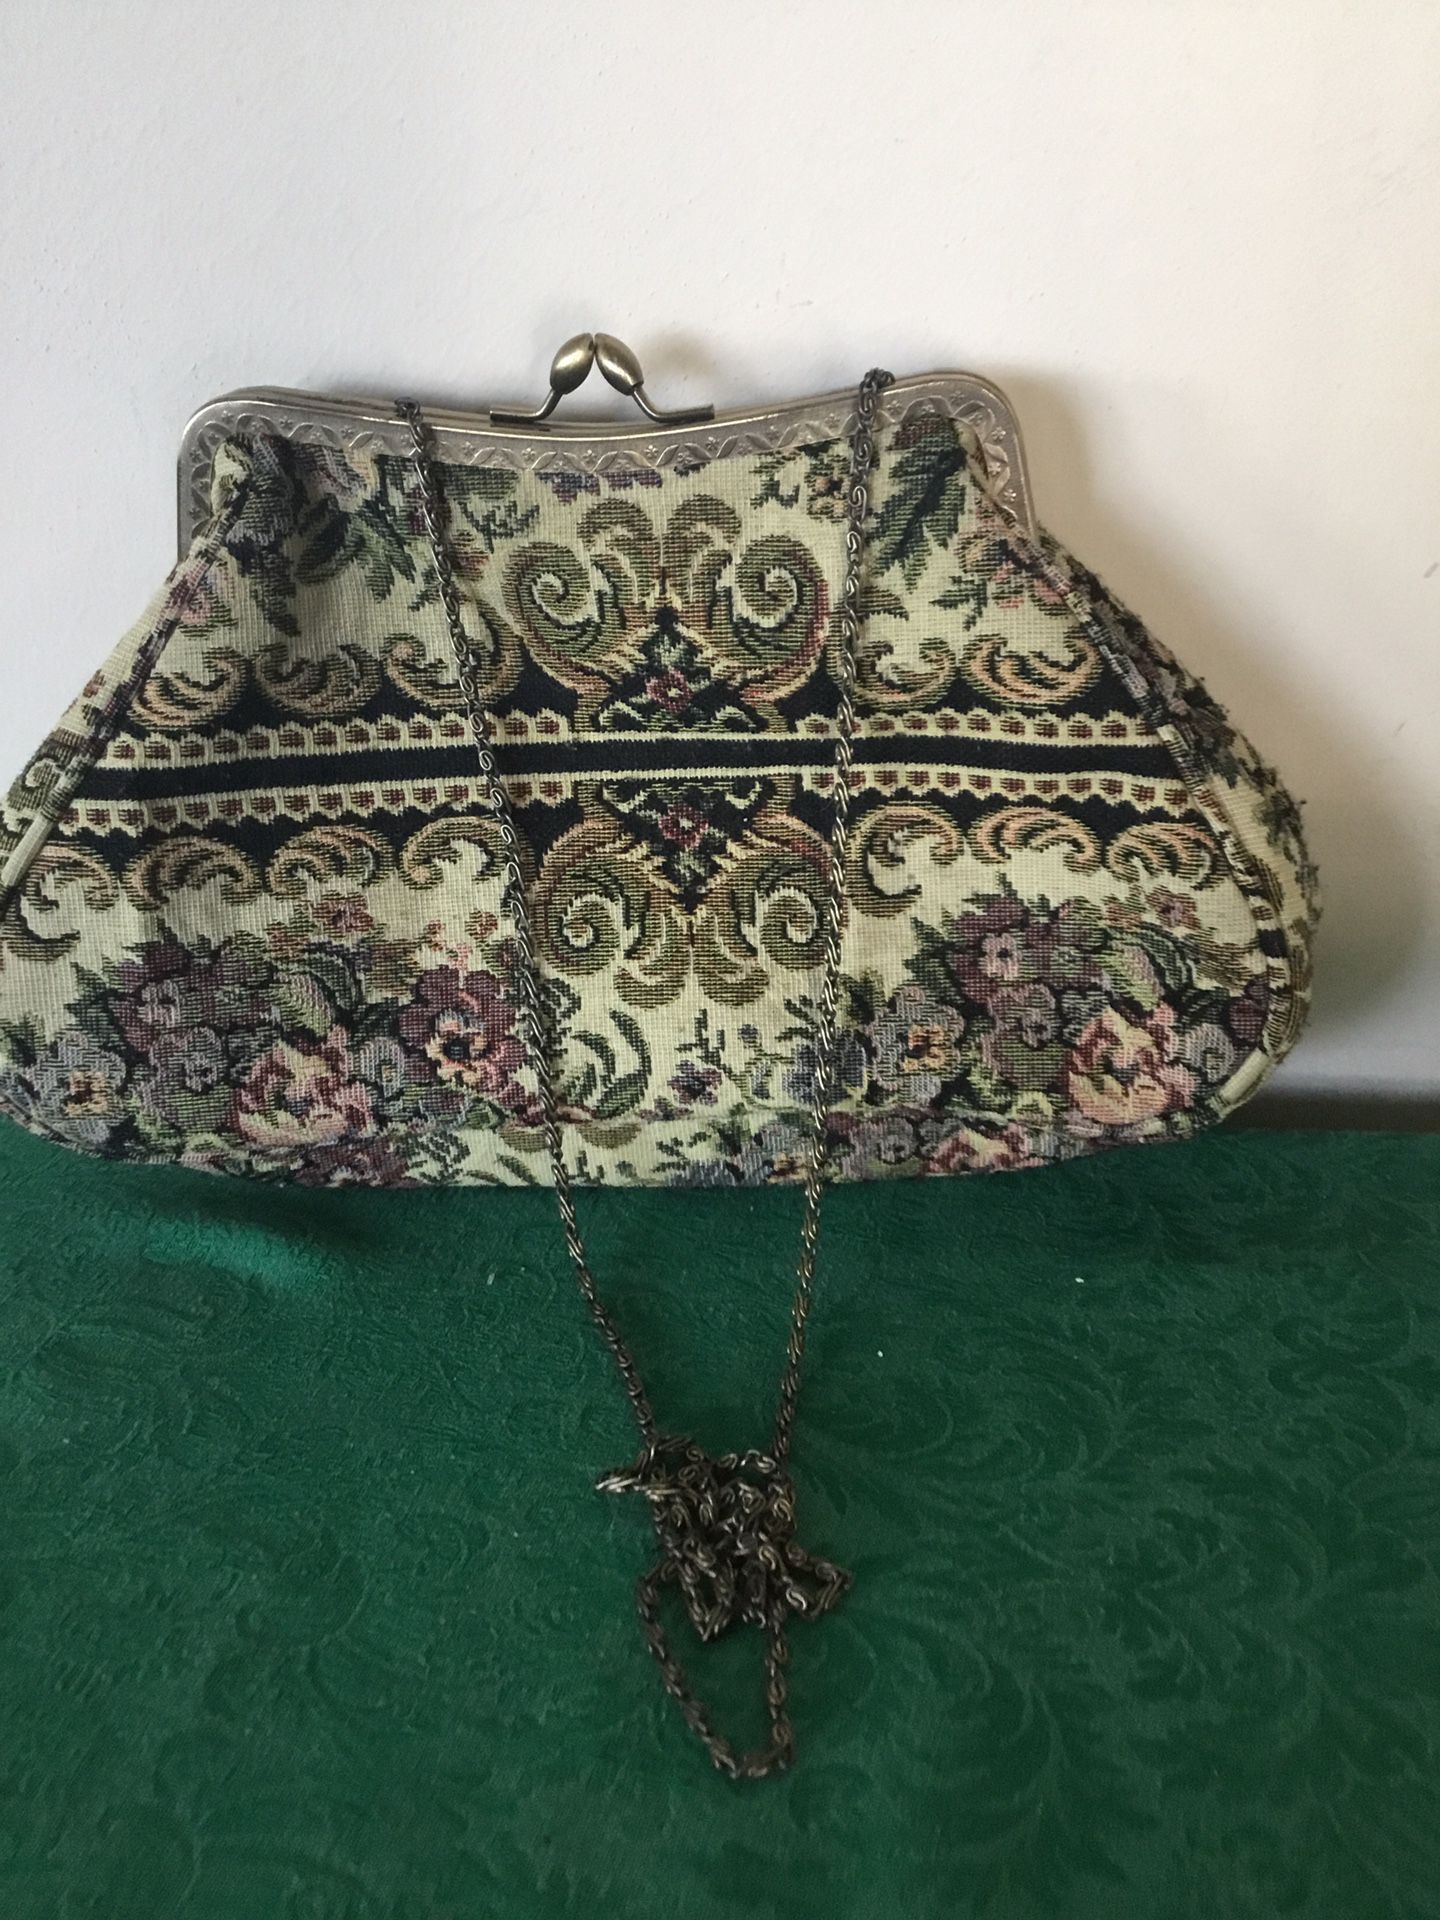 Vintage Beaded Floral Tapestry Beaded Evening Purse Gold Tone Frame Ornate Chain 